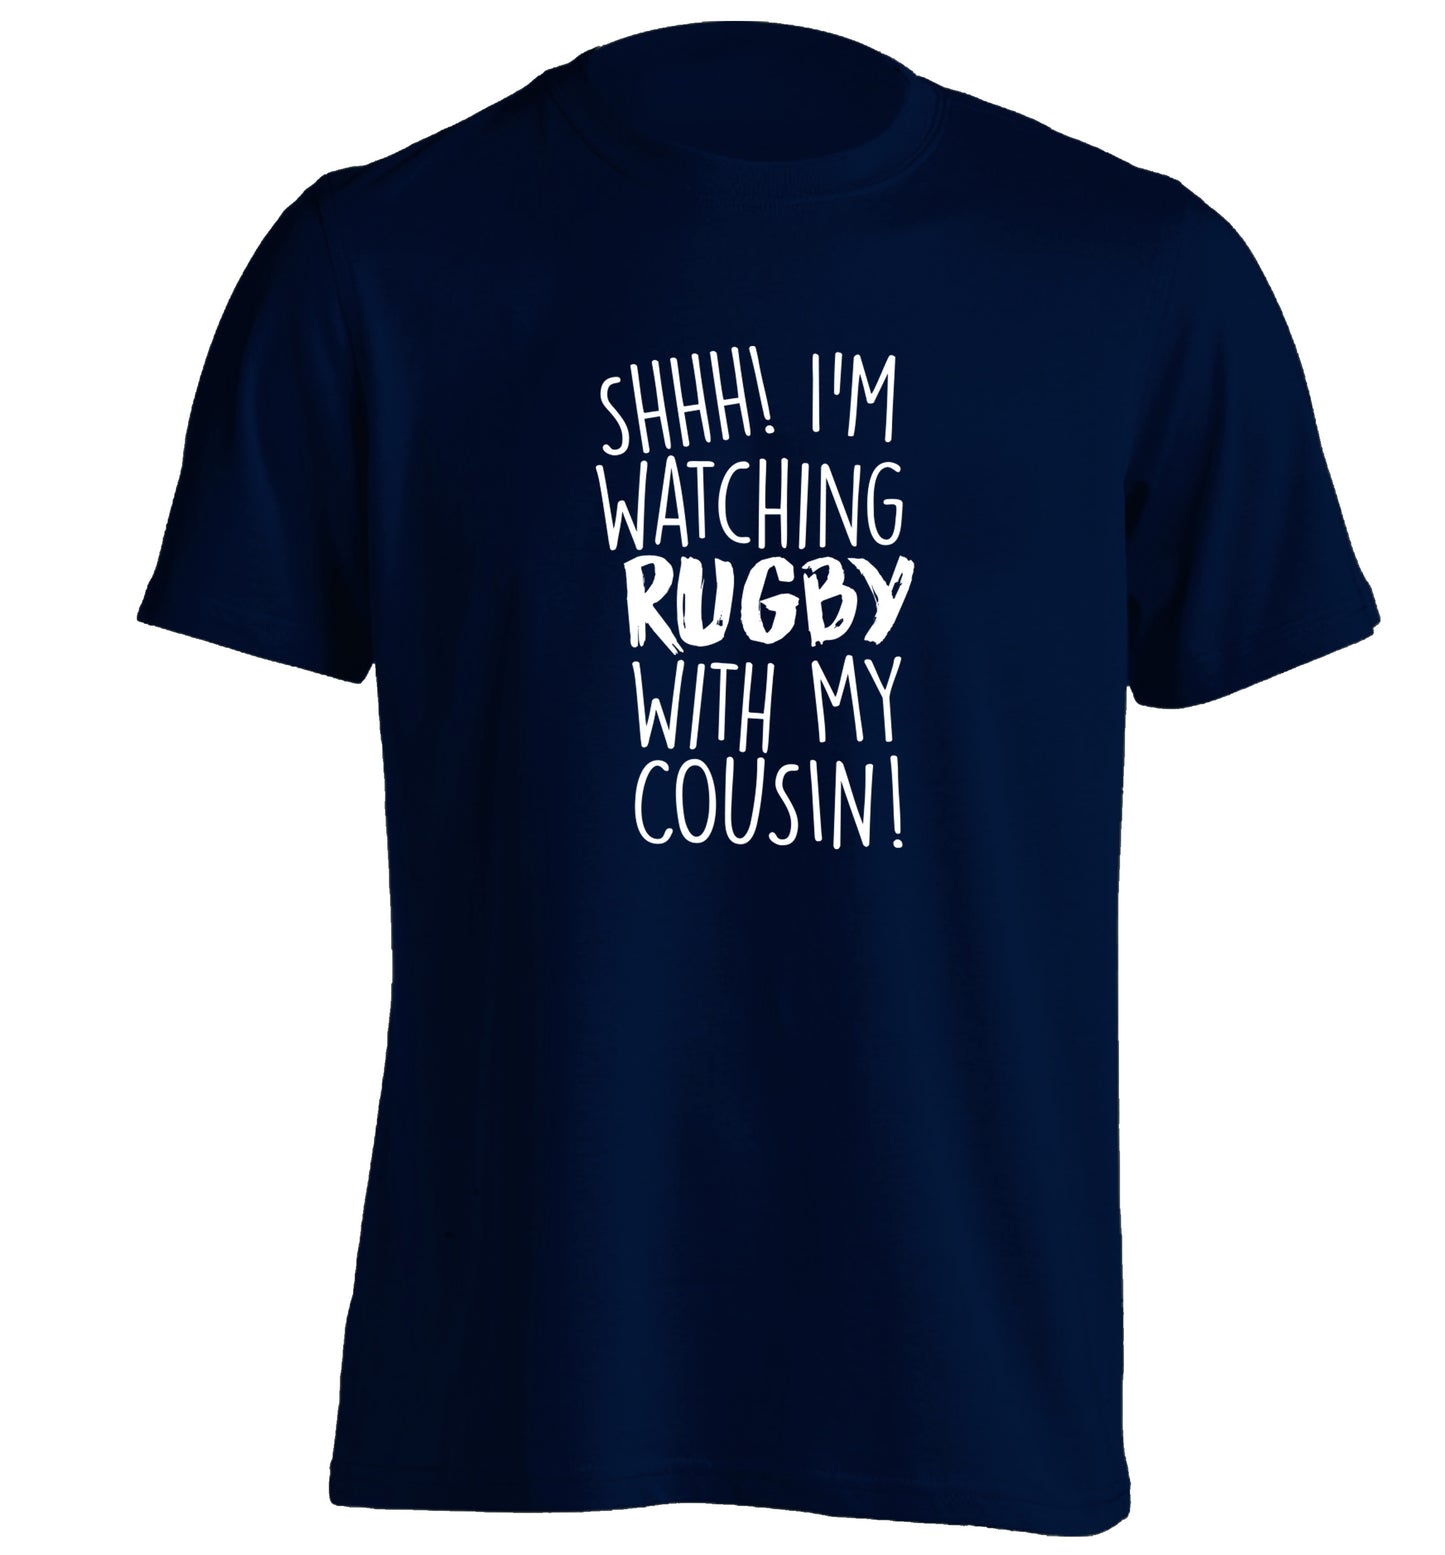 Shhh I'm watching rugby with my cousin adults unisex navy Tshirt 2XL